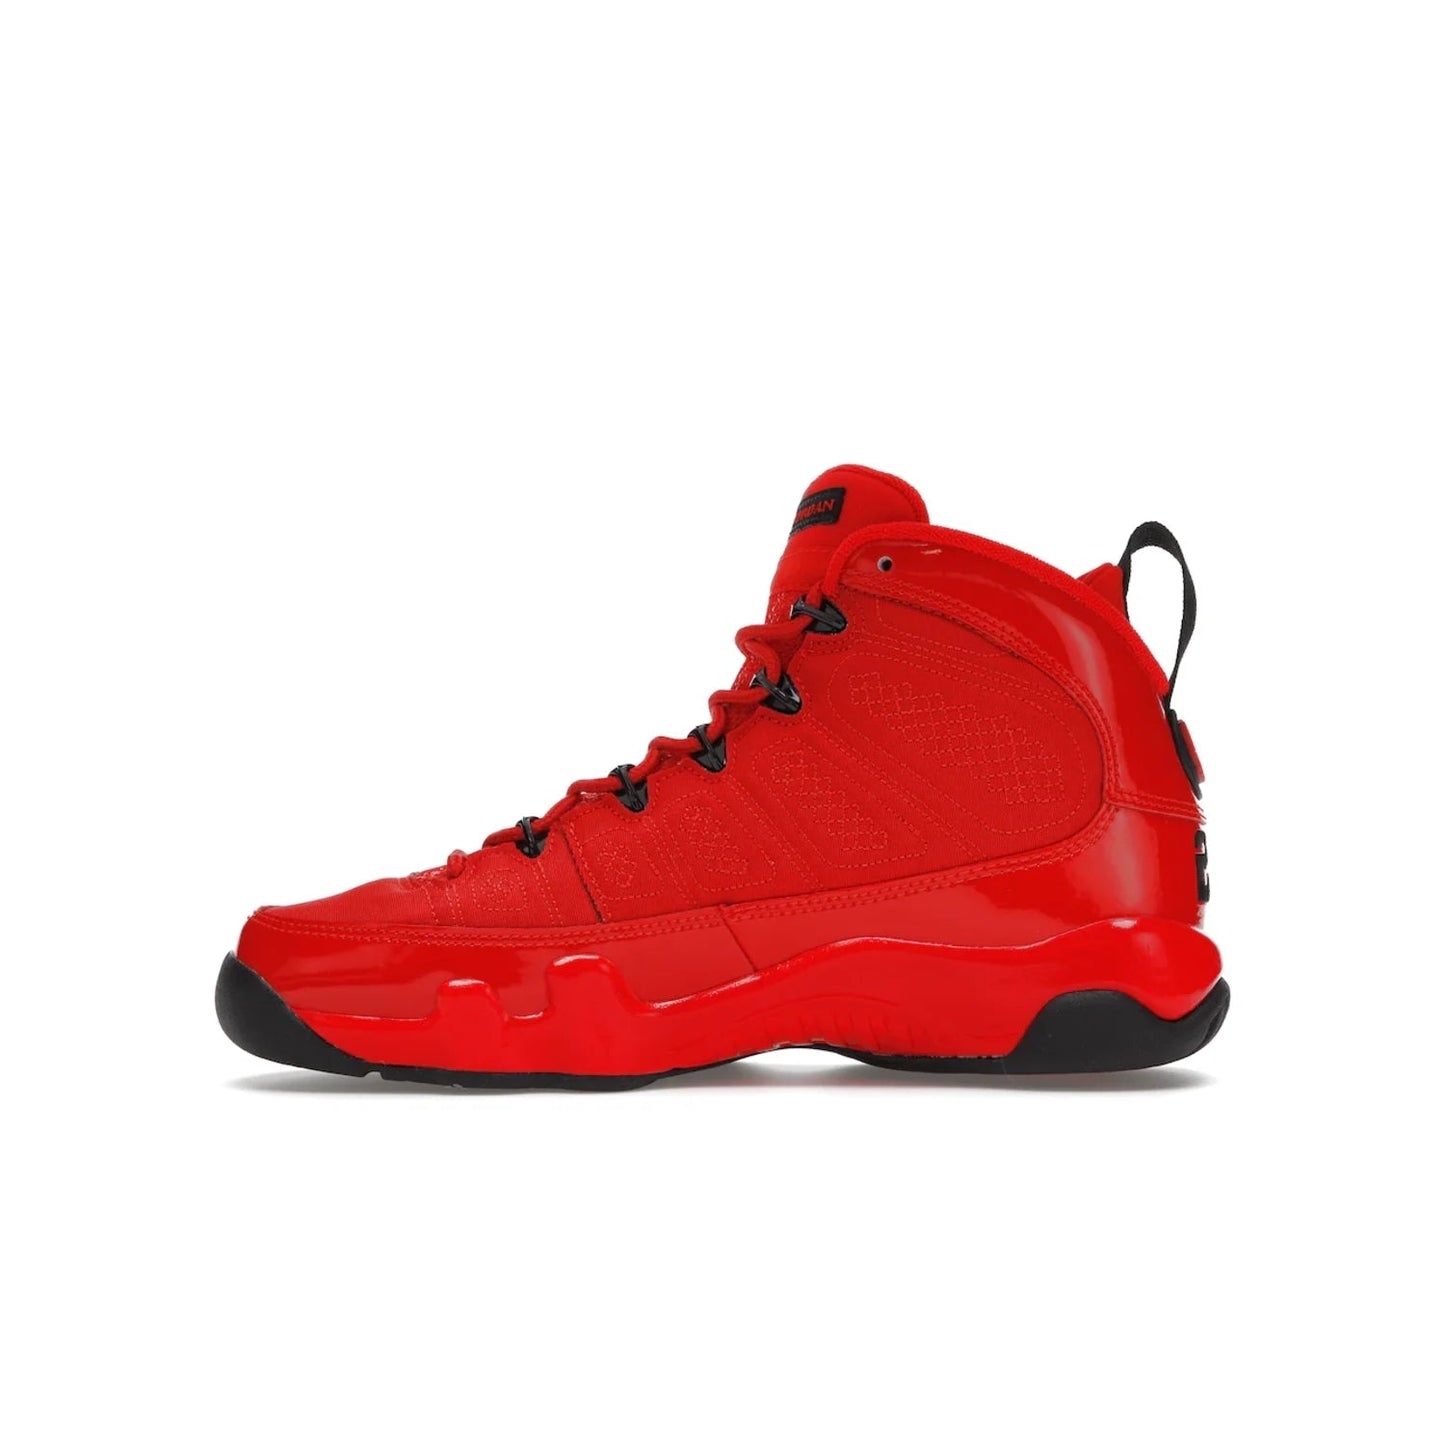 Jordan 9 Retro Chile Red (GS) - Image 19 - Only at www.BallersClubKickz.com - Introducing the Air Jordan 9 Retro Chile Red (GS), a vintage 1993 silhouette with fiery colorway. Features quilted side paneling, glossy patent leather, pull tabs, black contrast accents, and foam midsole. Launching May 2022 for $140.